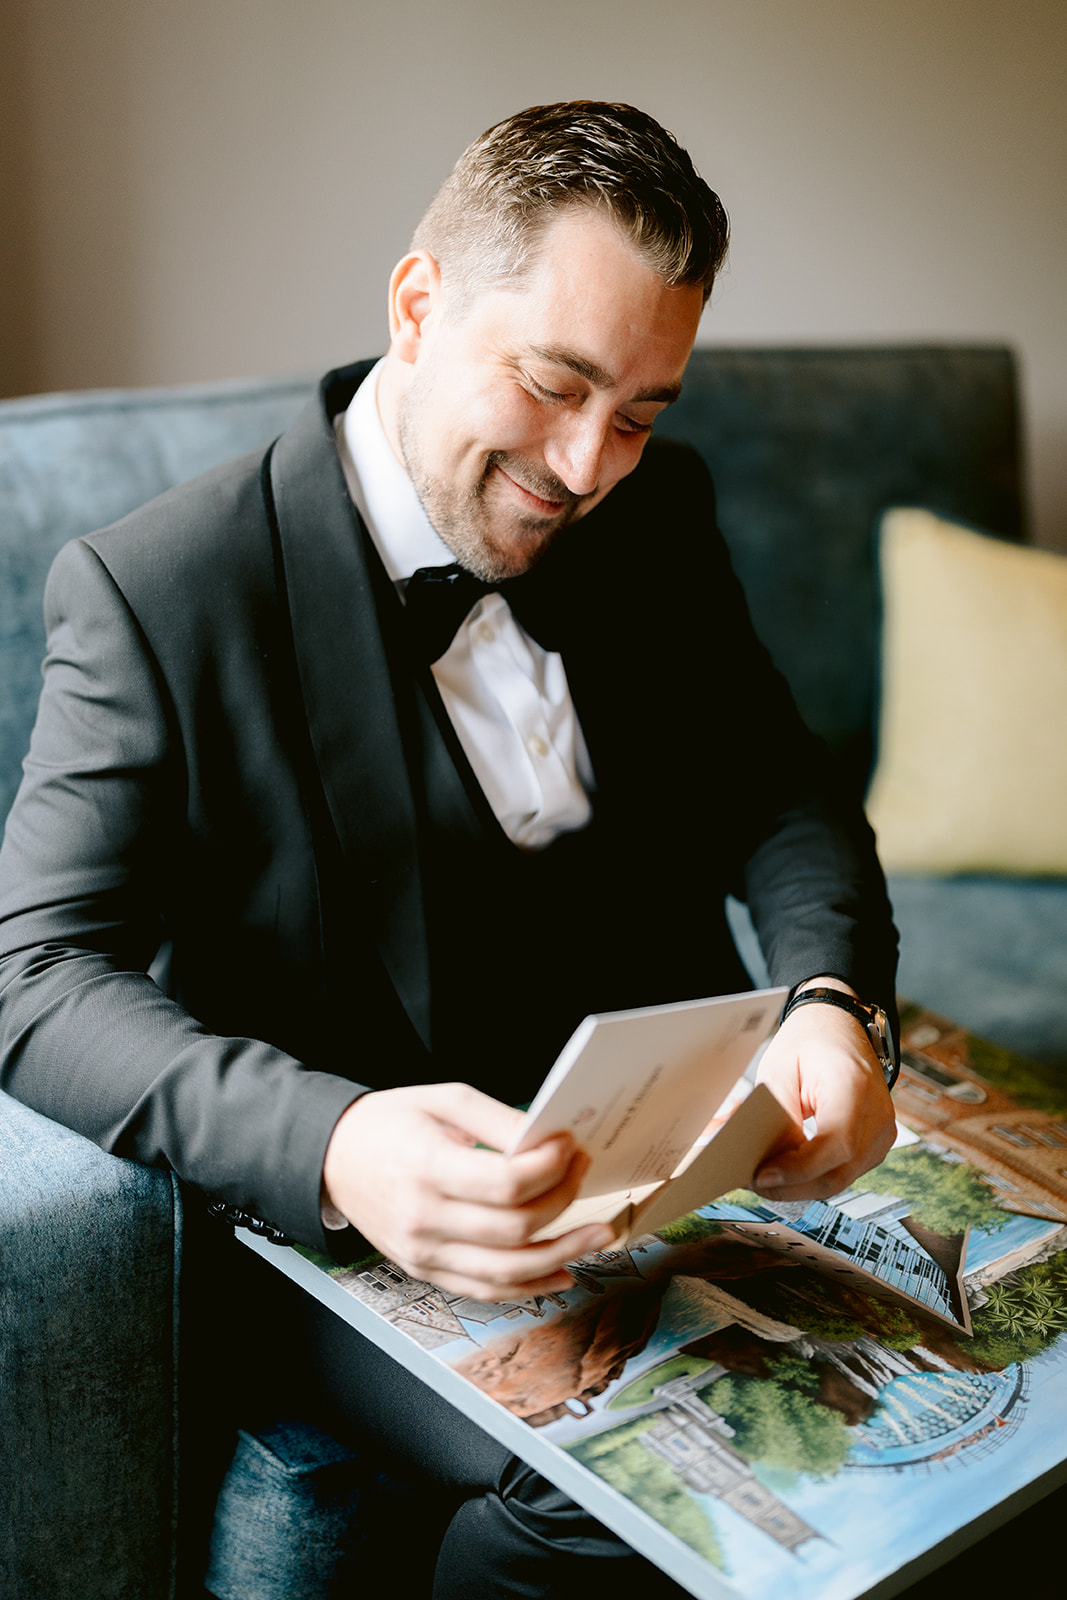 groom opening a wedding gift from the bride